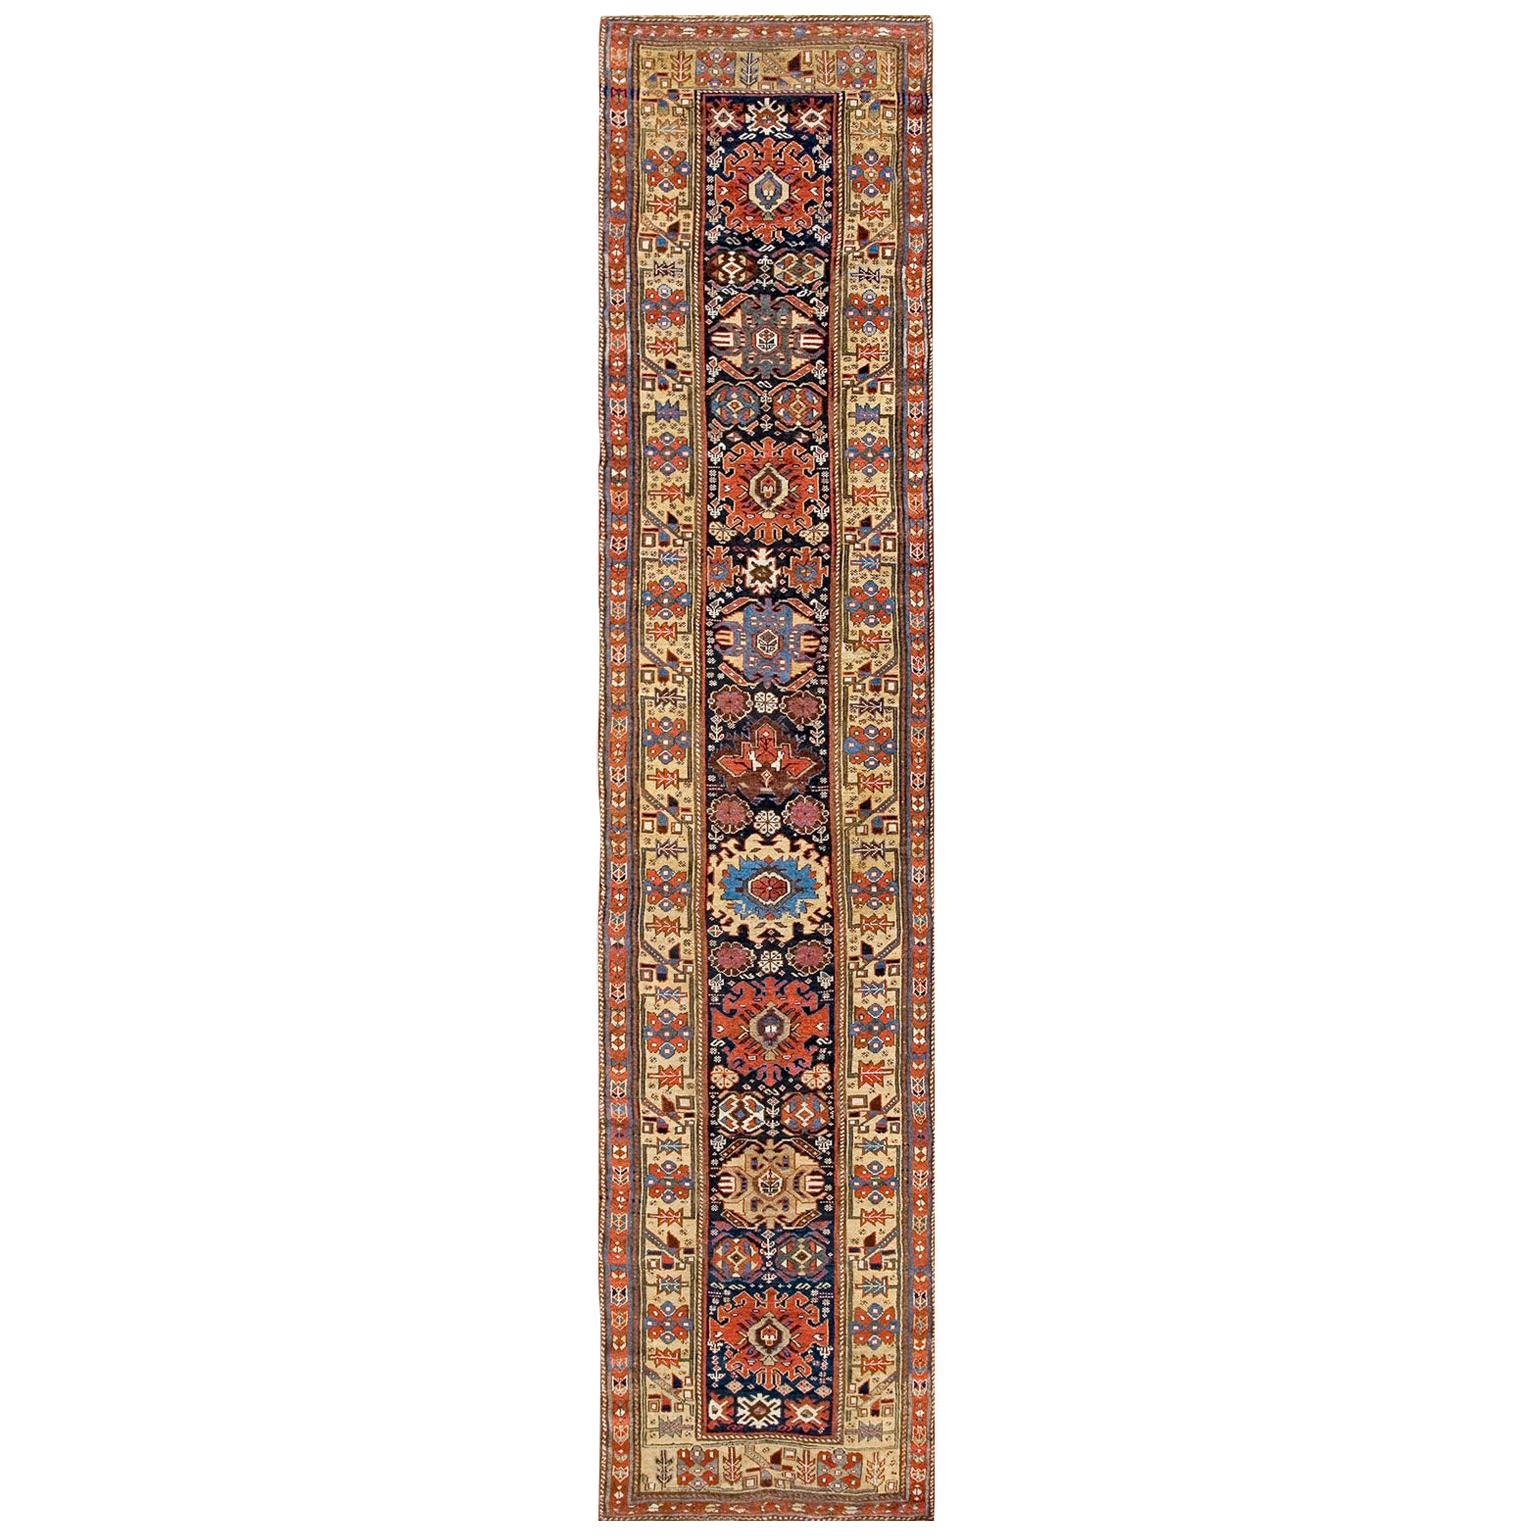 Mid 19th Century N.W. Persian Carpet ( 3'3" x 14'8" - 99 x 448 ) For Sale